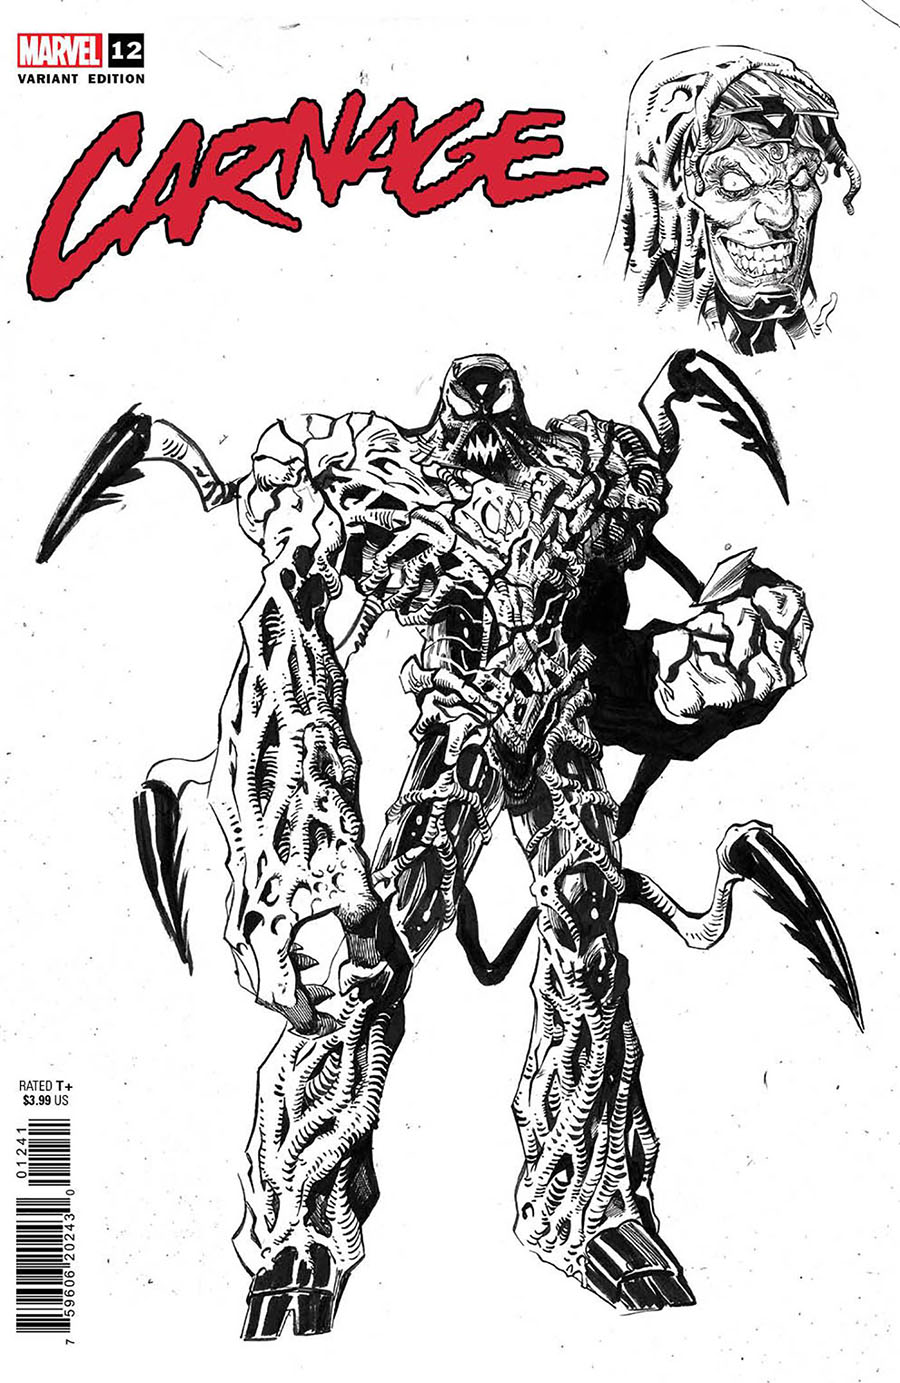 Carnage Vol 3 #12 Cover C Incentive Ryan Stegman Design Variant Cover